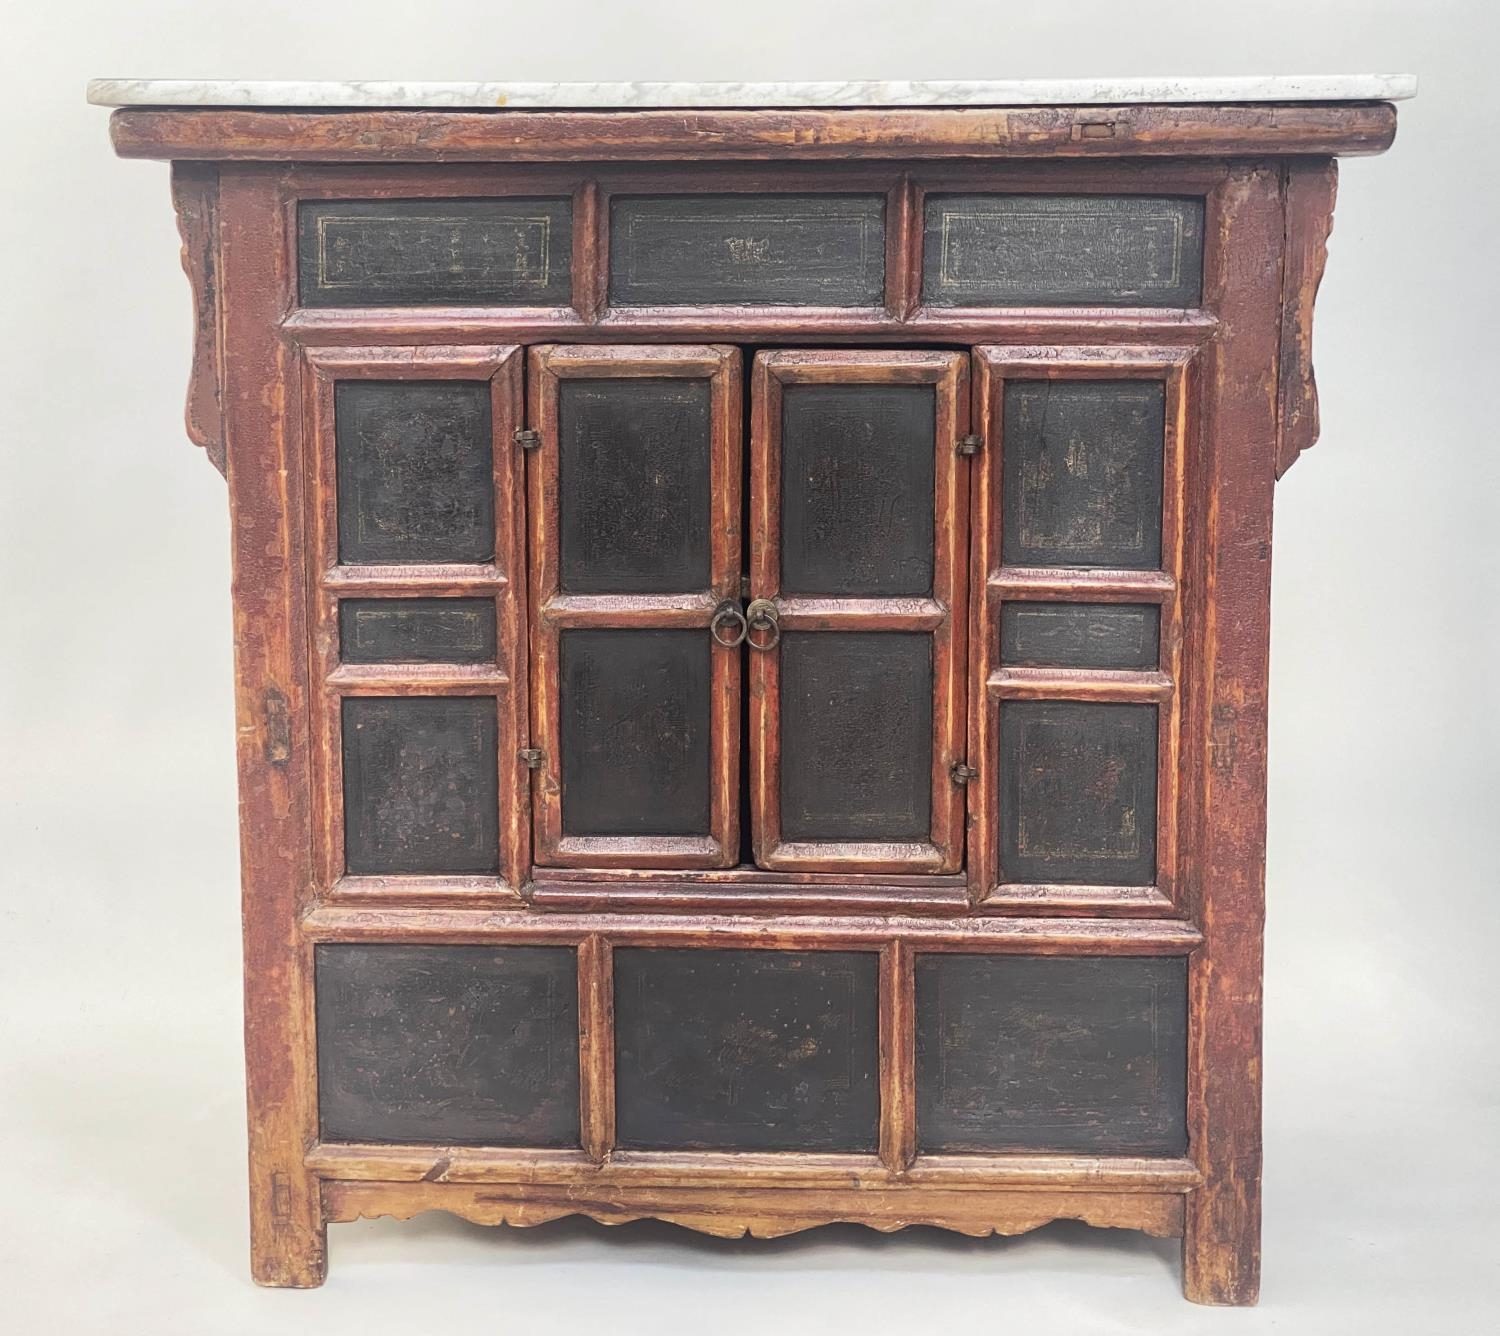 CHINESE SIDE CABINET, 19th century Chinese scarlet lacquered with lattice front and two doors with